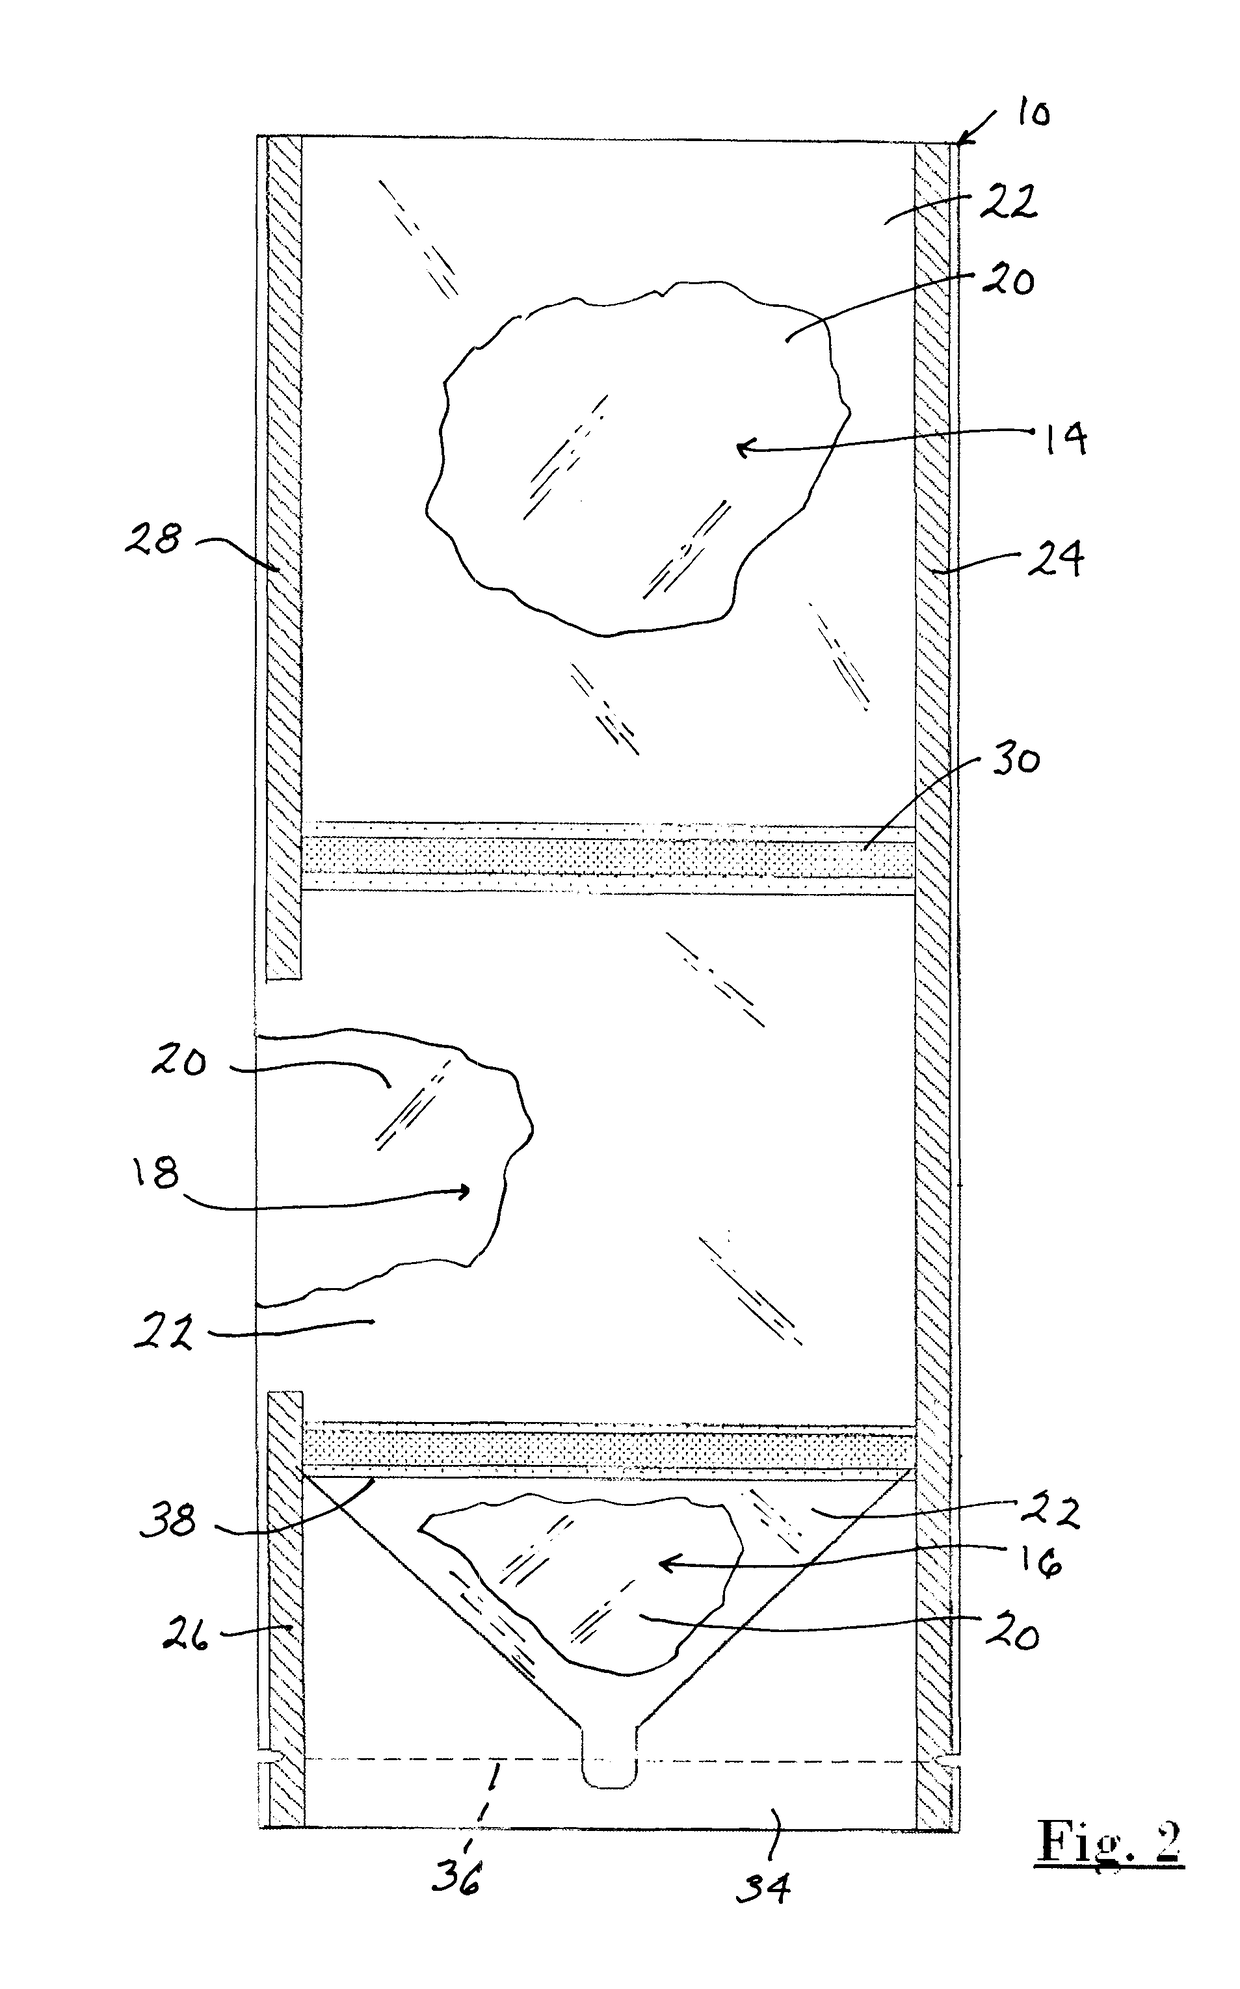 Fabrication of polymeric dental devices and aids